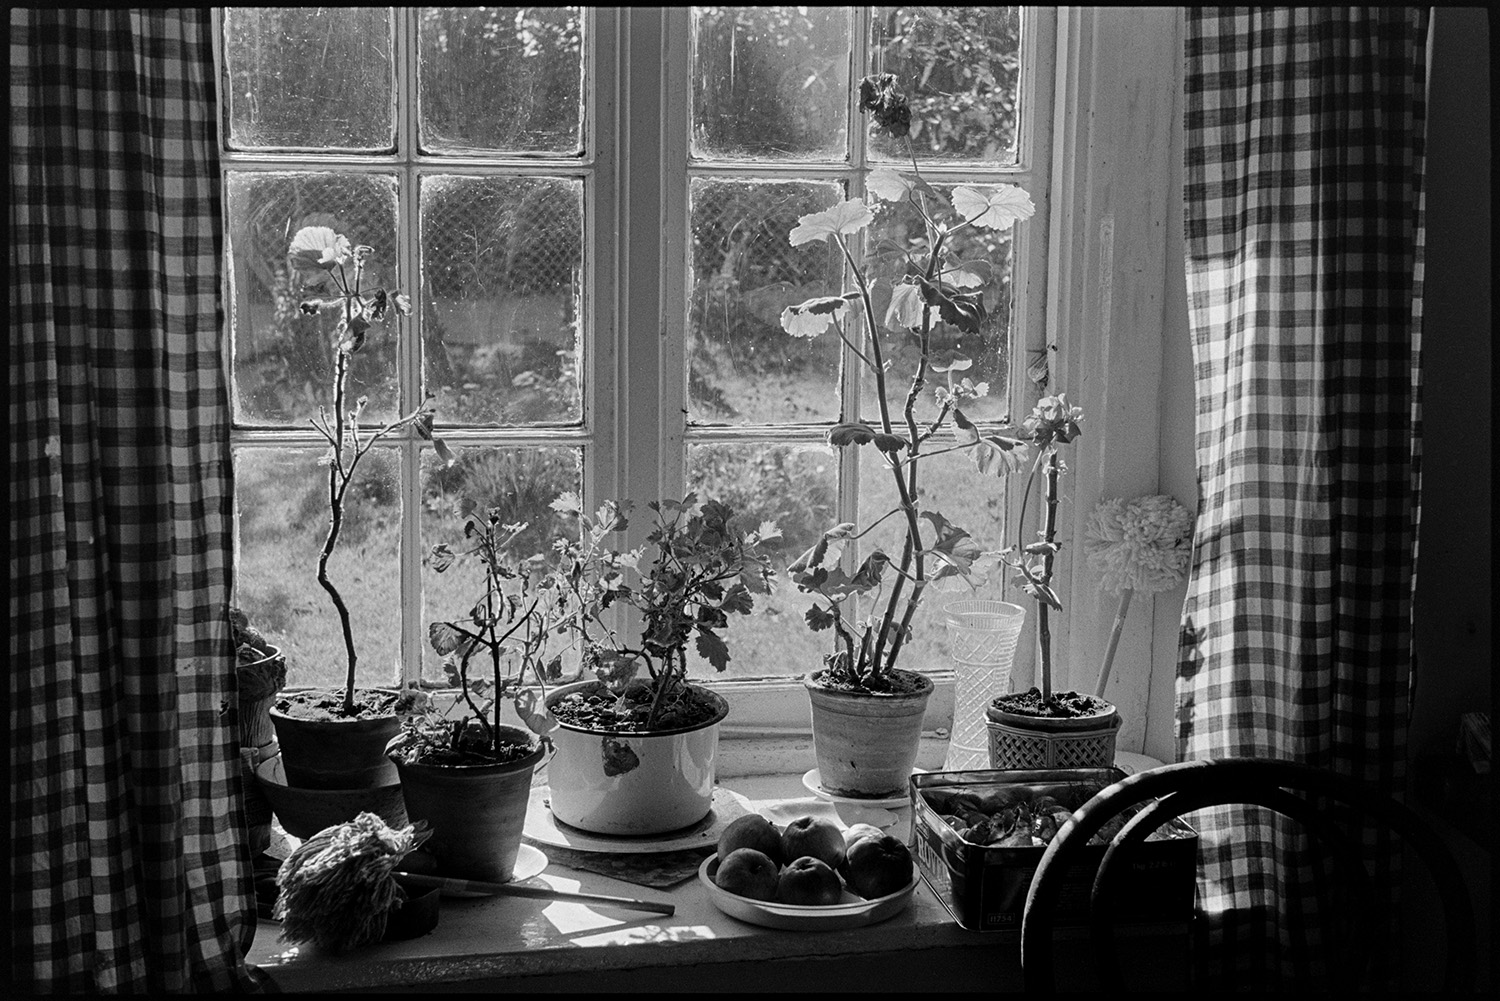 Cottage front window sill with potted plants, flower pots sunlit. 
[A window sill in a cottage at Mariansleigh with pot plants, a tray of apples, a feather duster and a tin, possibly with vegetables inside. The sun is shining through the window and onto the plants. Chequered curtains are hung either side of the window.]